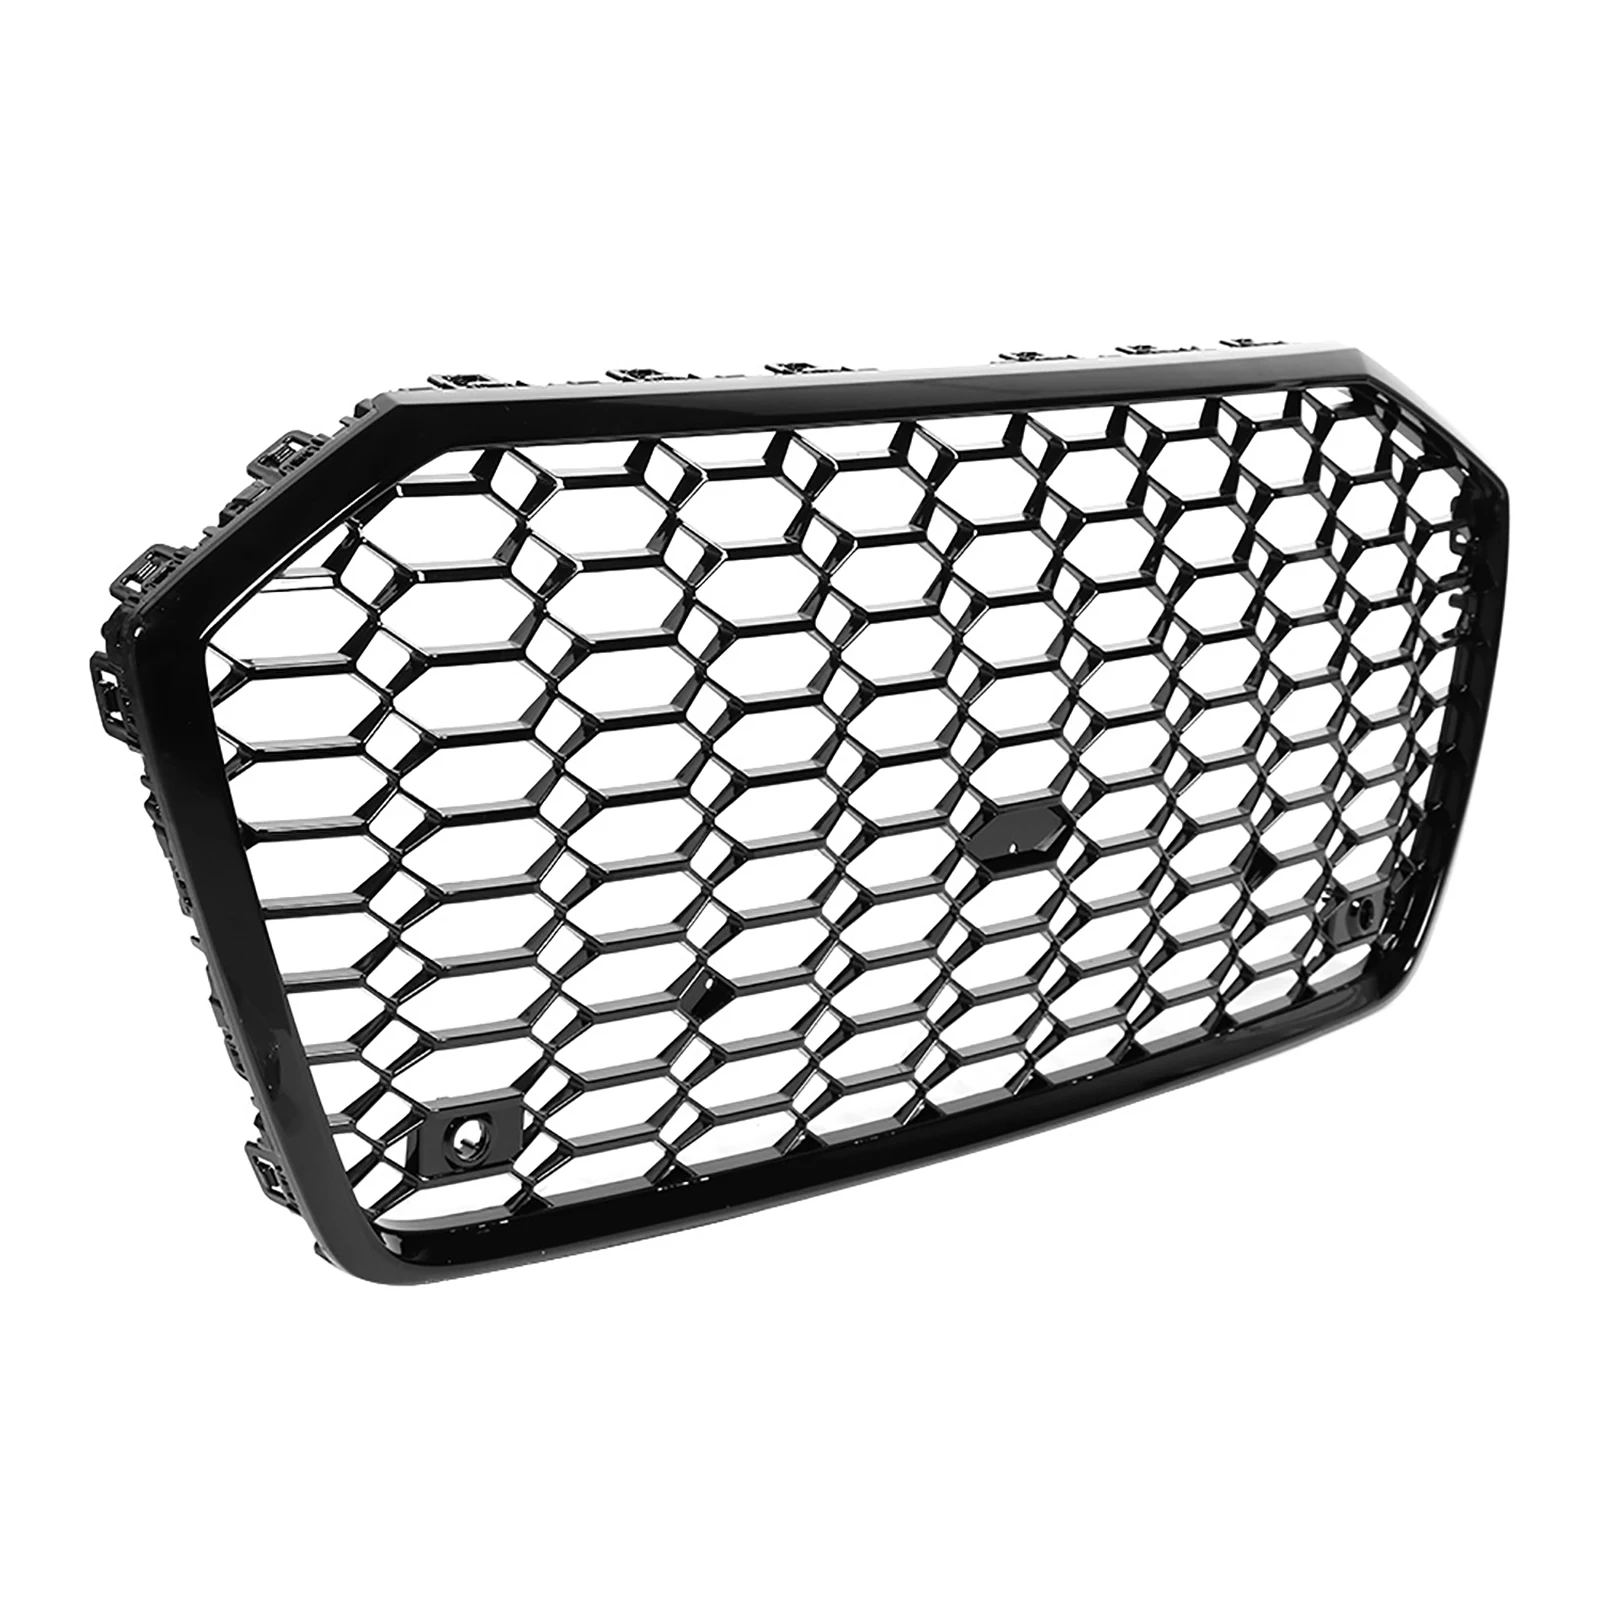 YKPDM Front apron Mesh grille for Audi A6 C8 2019-2021 refit for RS6 style black color accessories fit